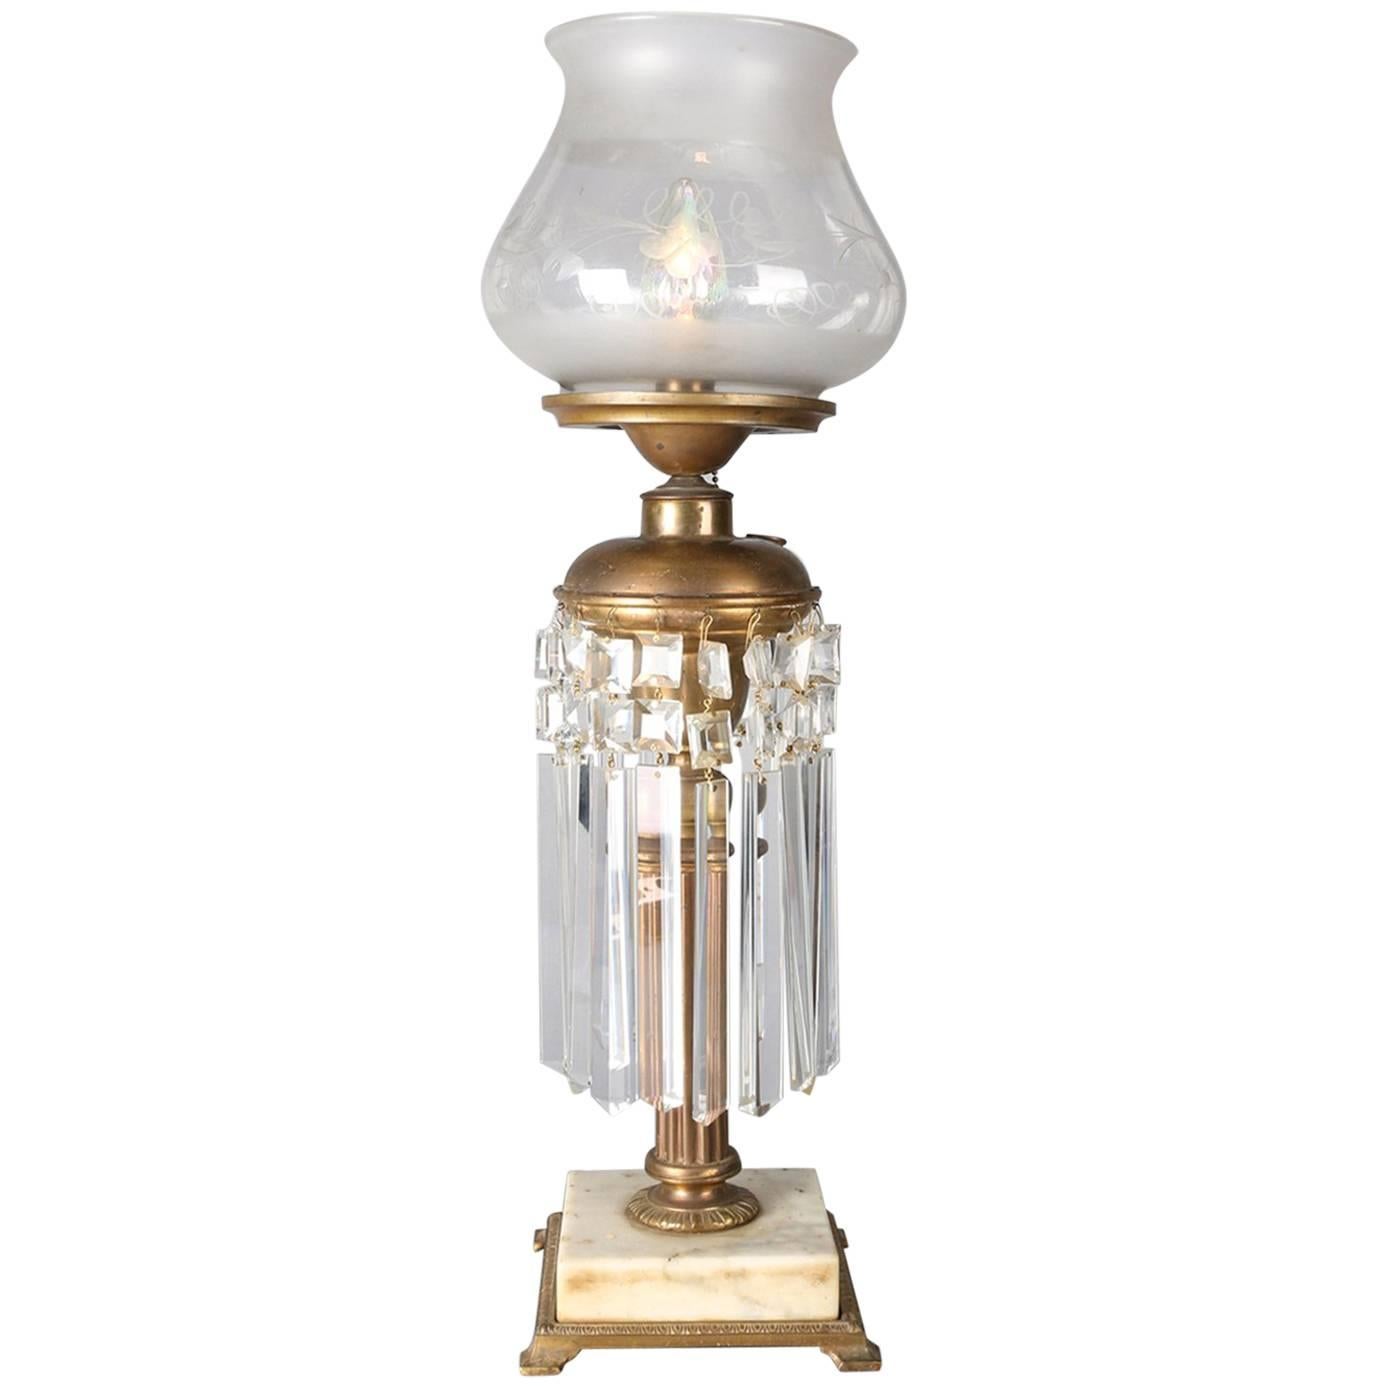 Antique Gilt, Marble and Crystal Electrified Solar Lamp, 19th Century